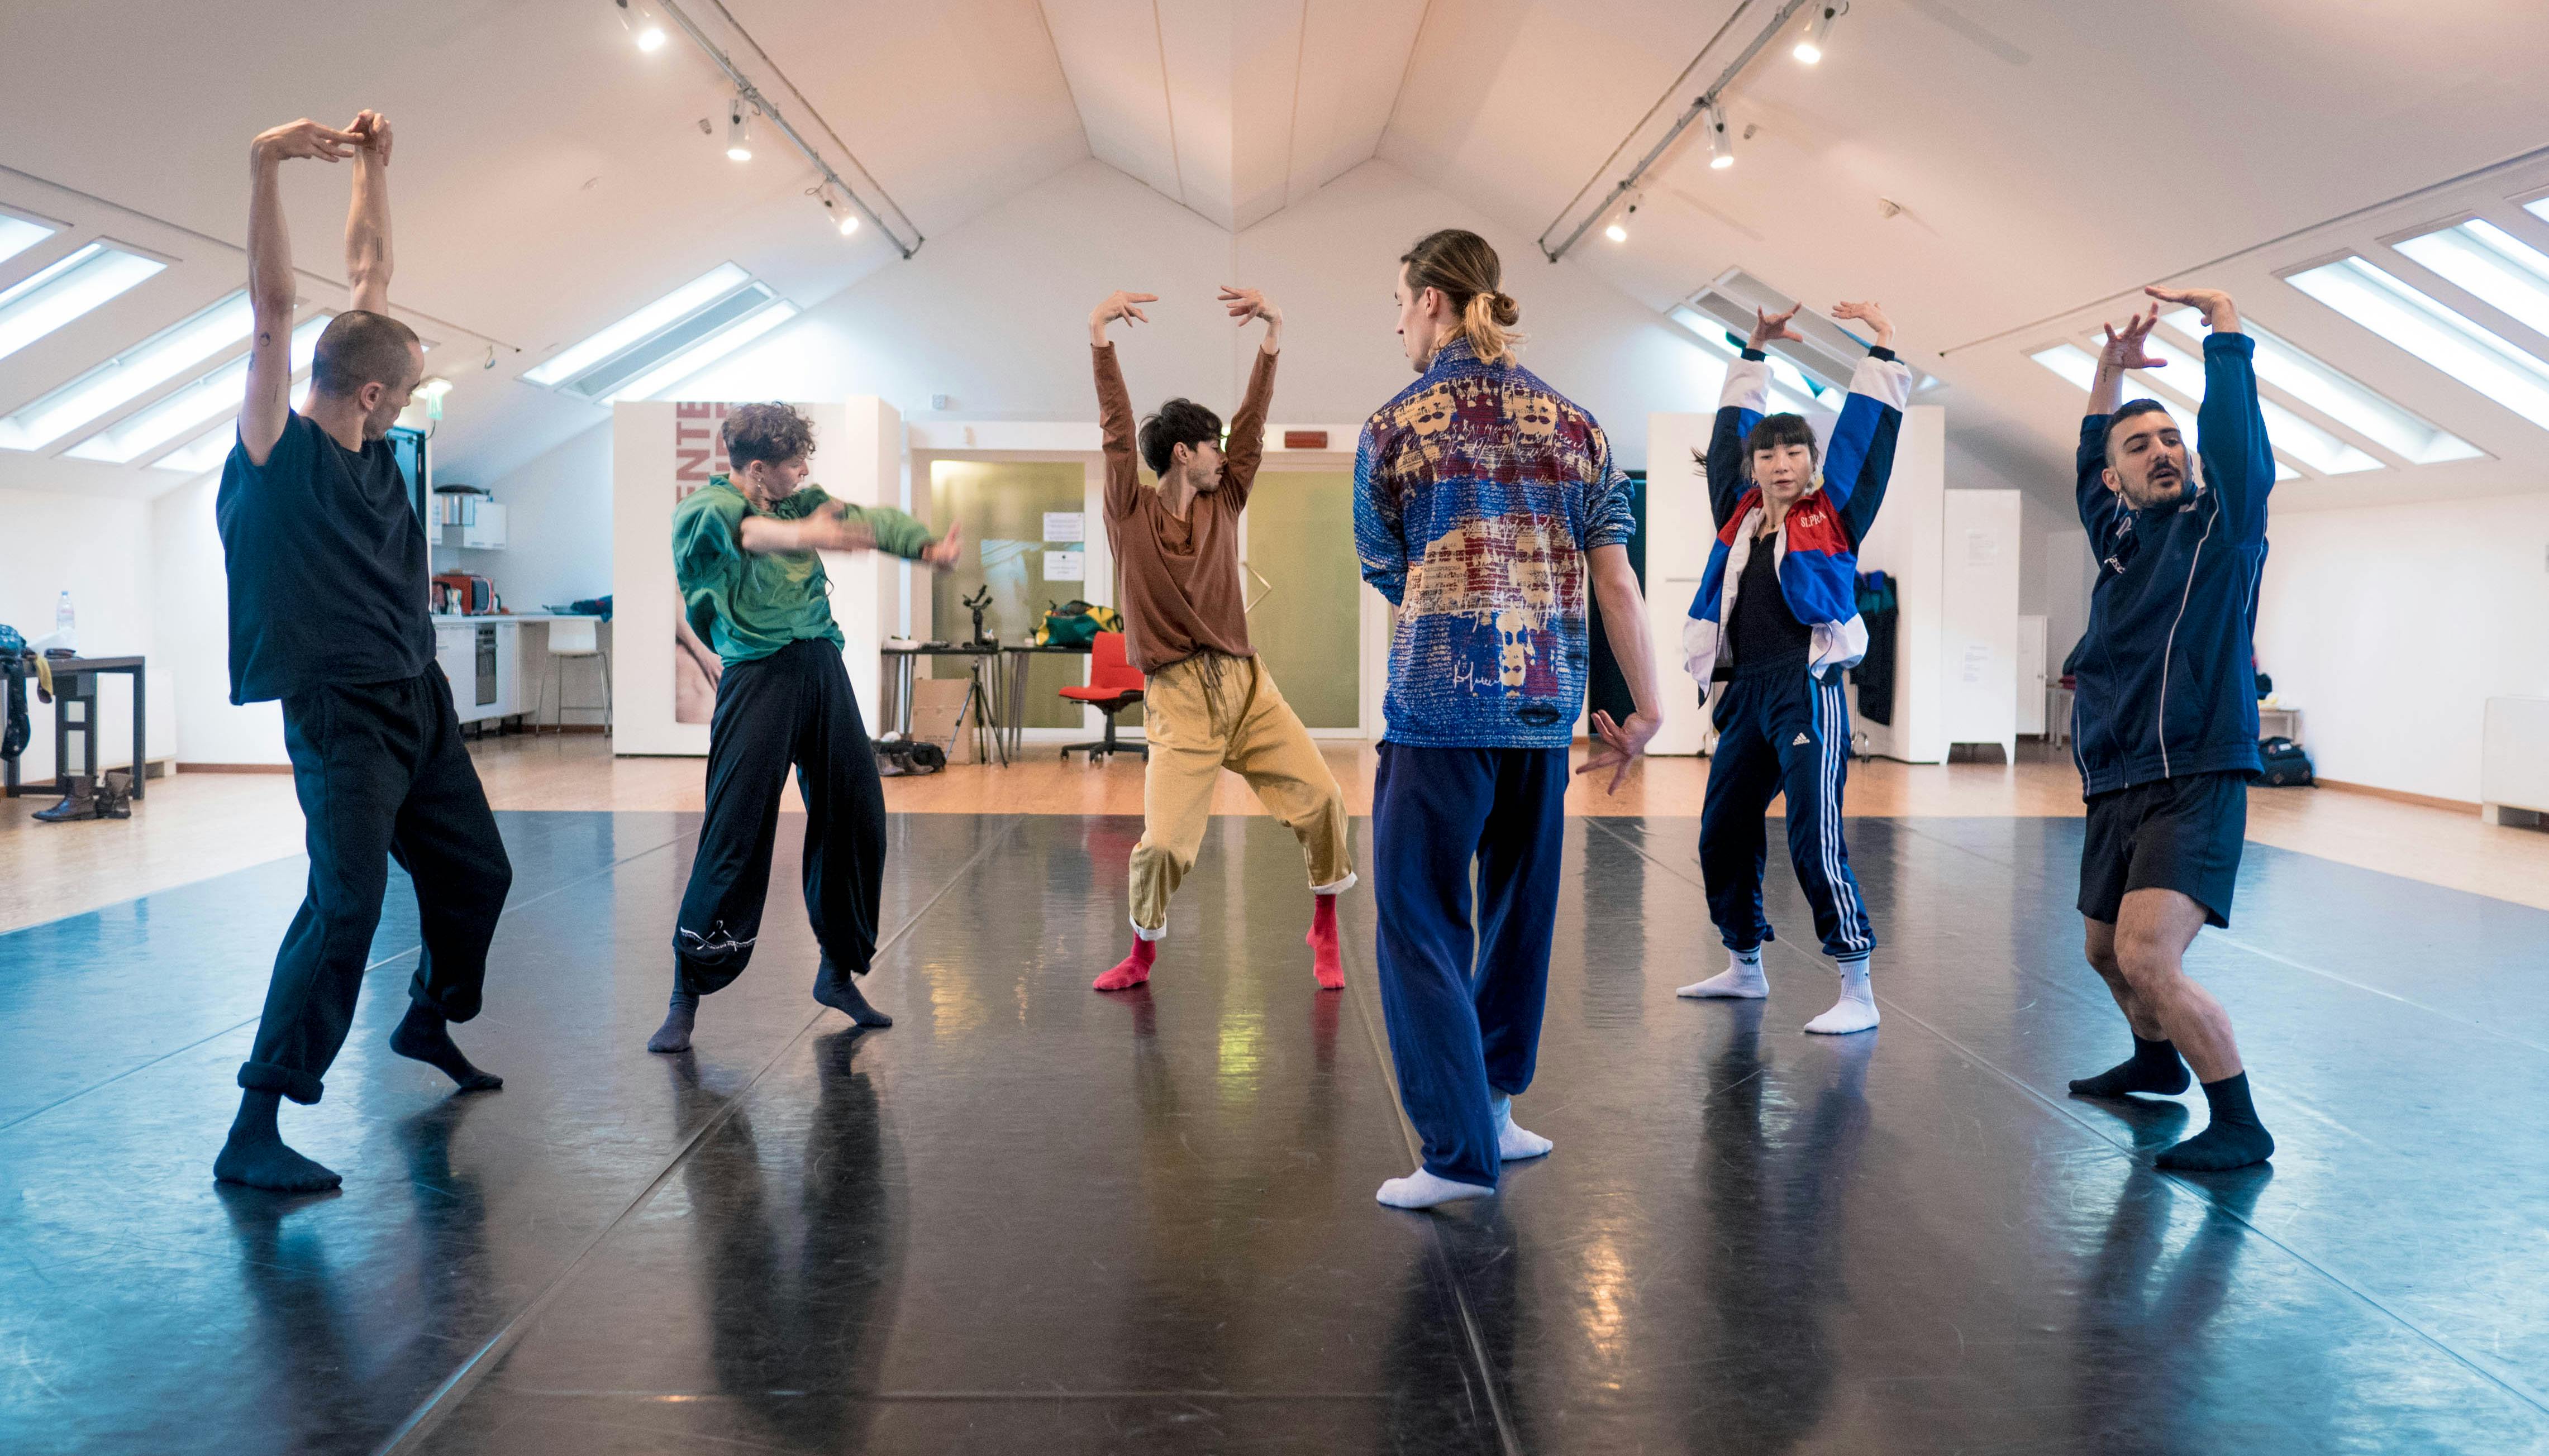 Six dancers are rehearsing in the Studio. They are standing in a circle, facing each other. They wear colorful jumpsuits and socks.